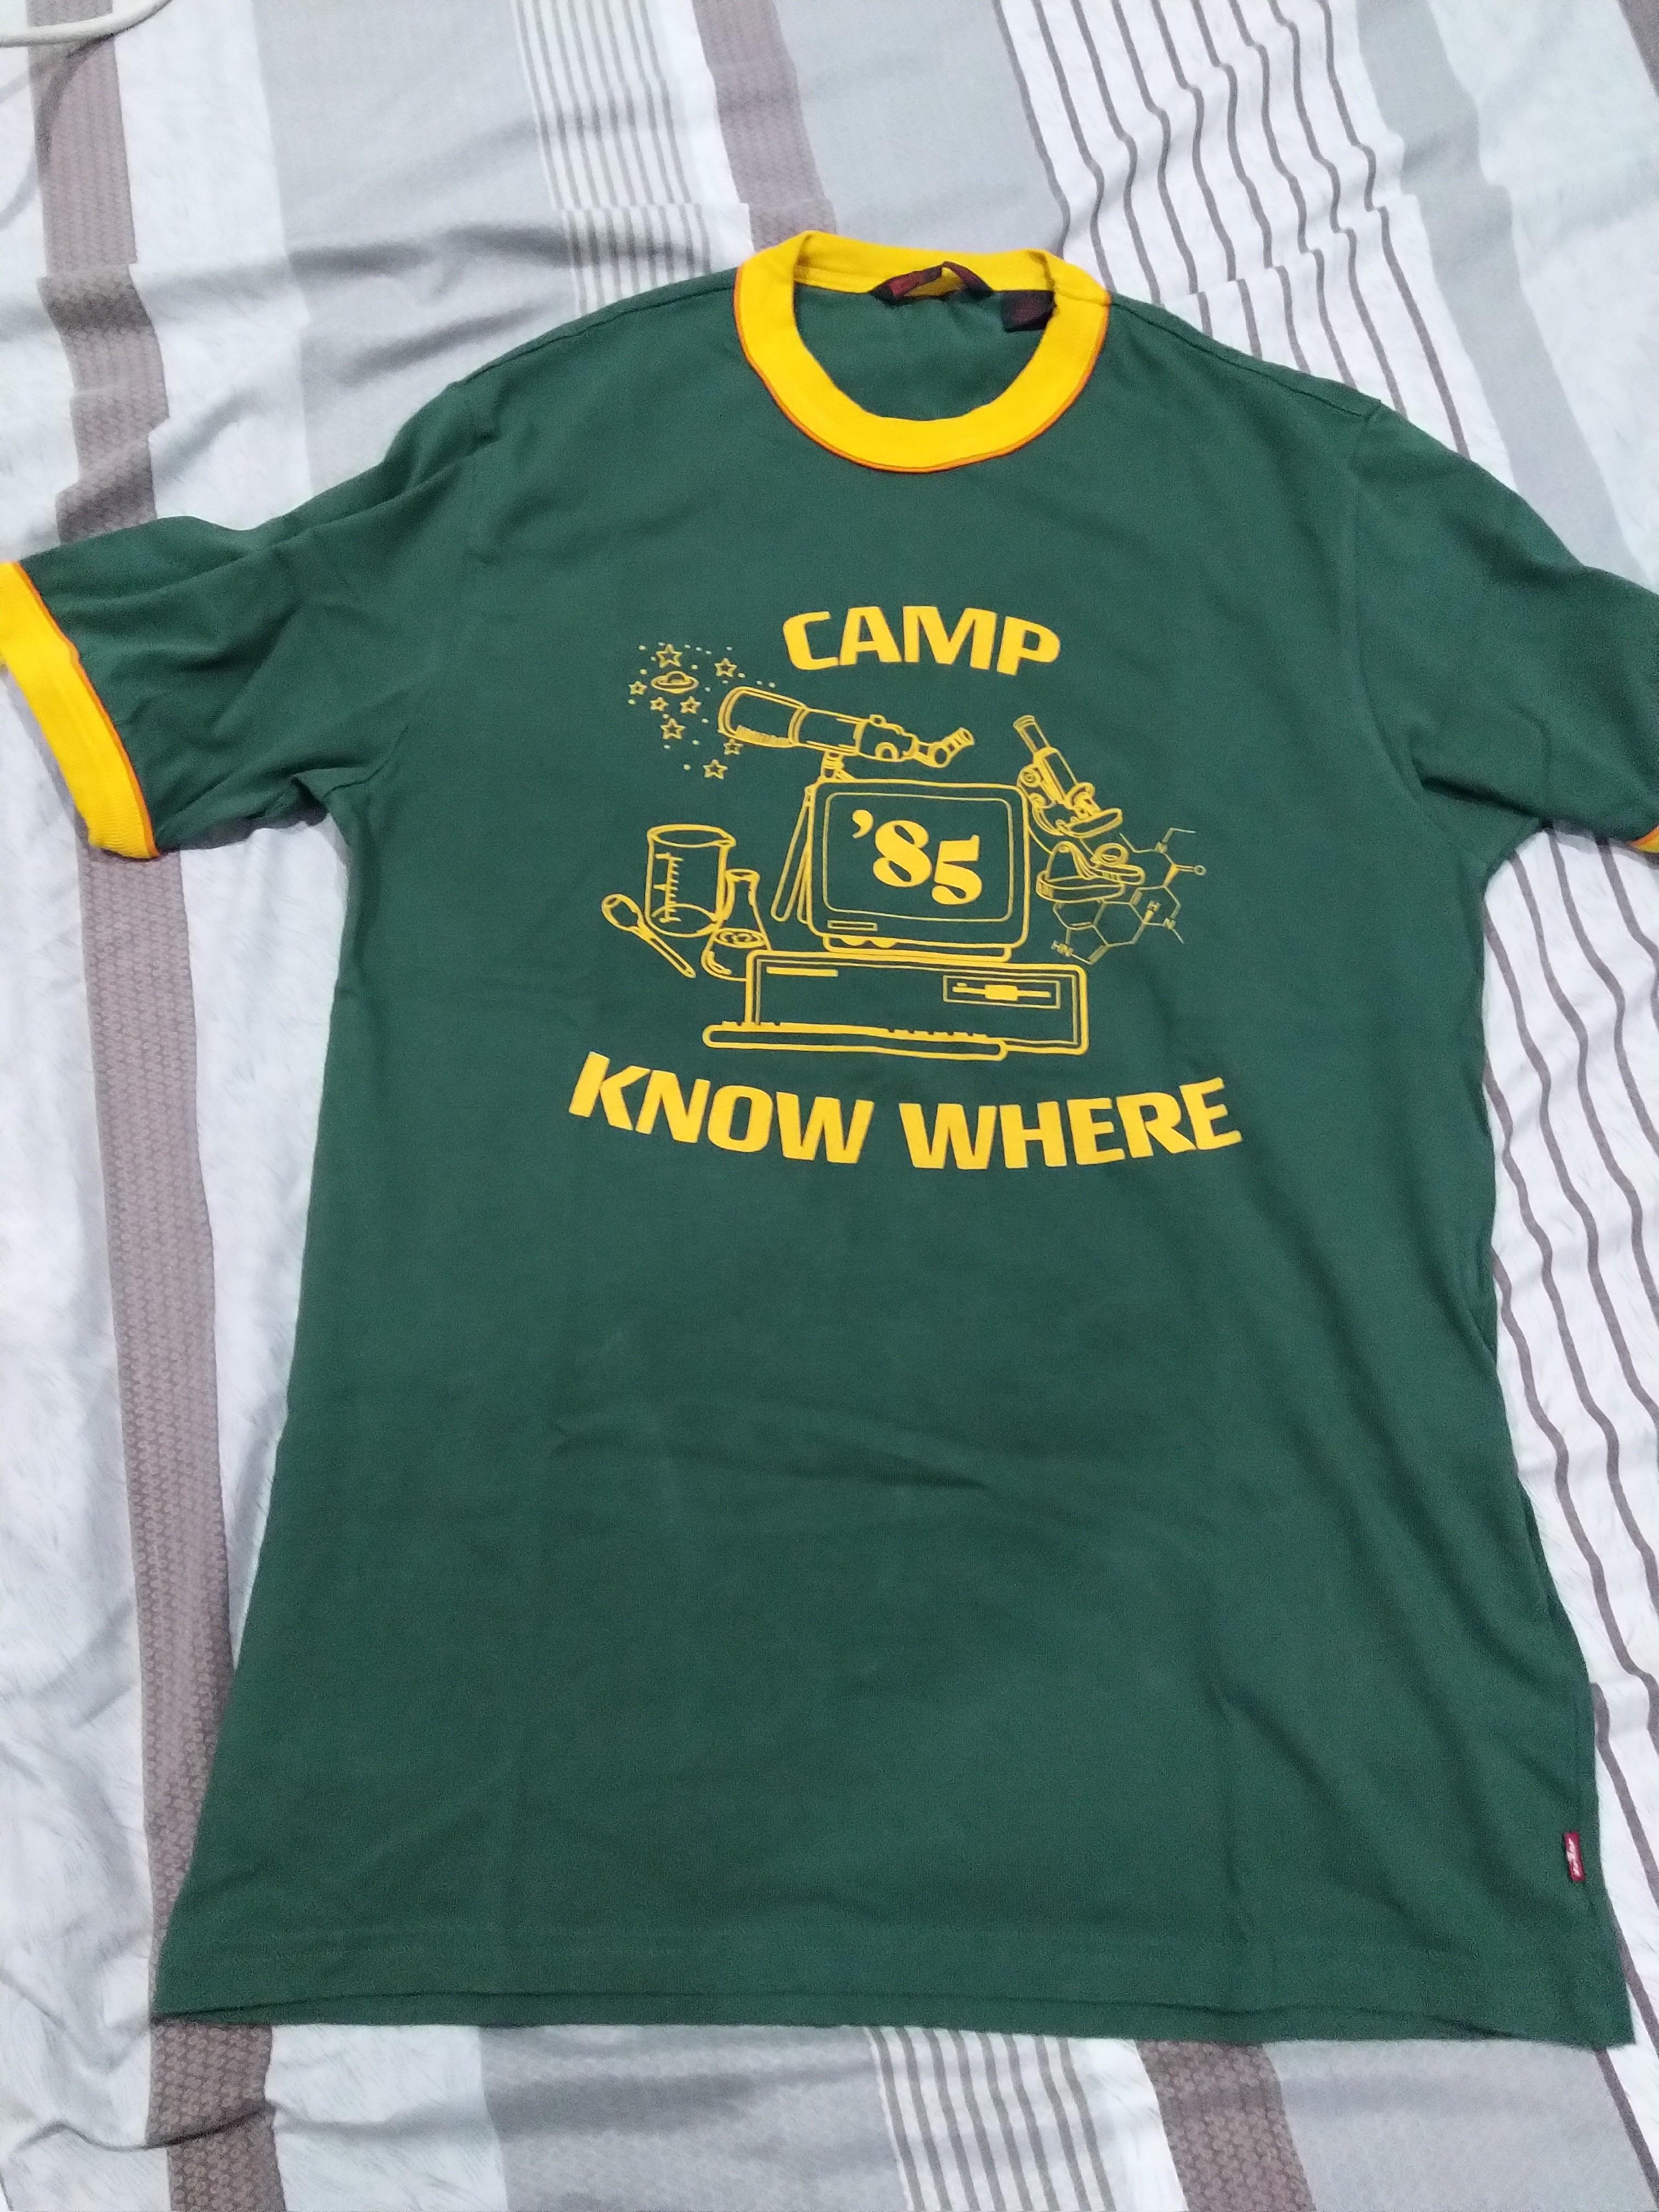 ORIGINAL 2019 Levi's x Stranger Things Camp Know Where Shirt, Men's  Fashion, Tops & Sets, Formal Shirts on Carousell